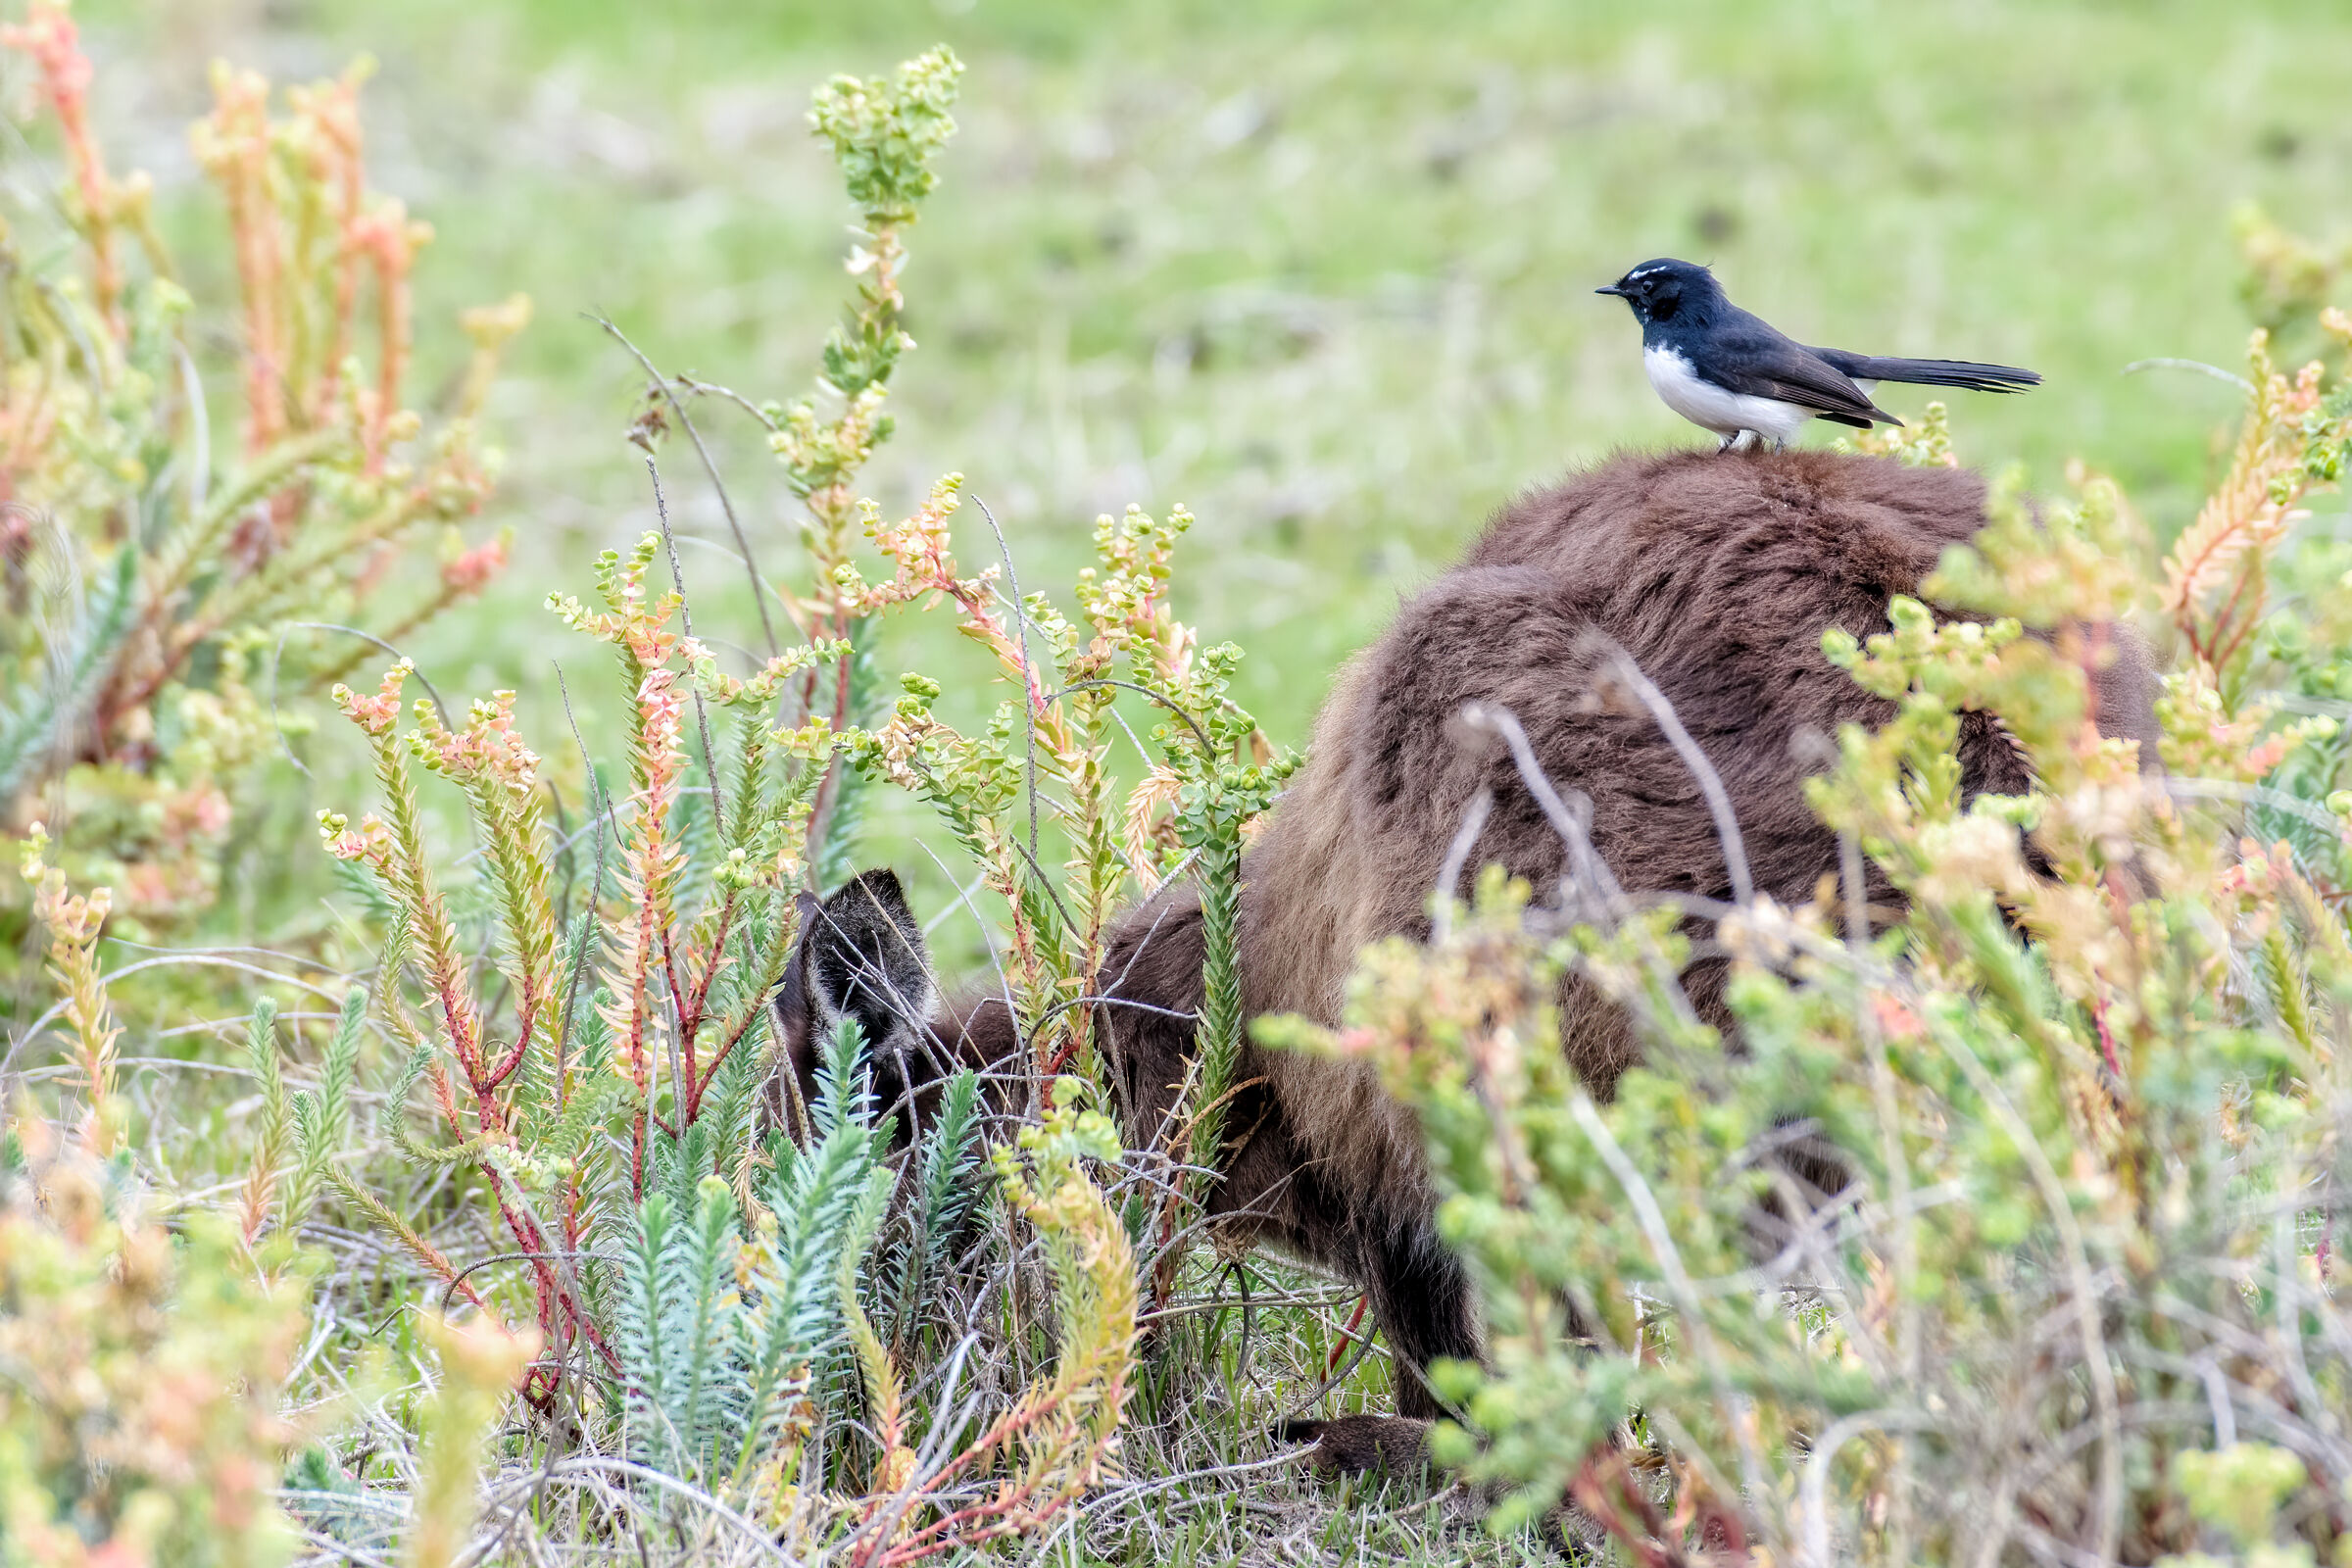 Willy wagtail & Swamp wallaby...